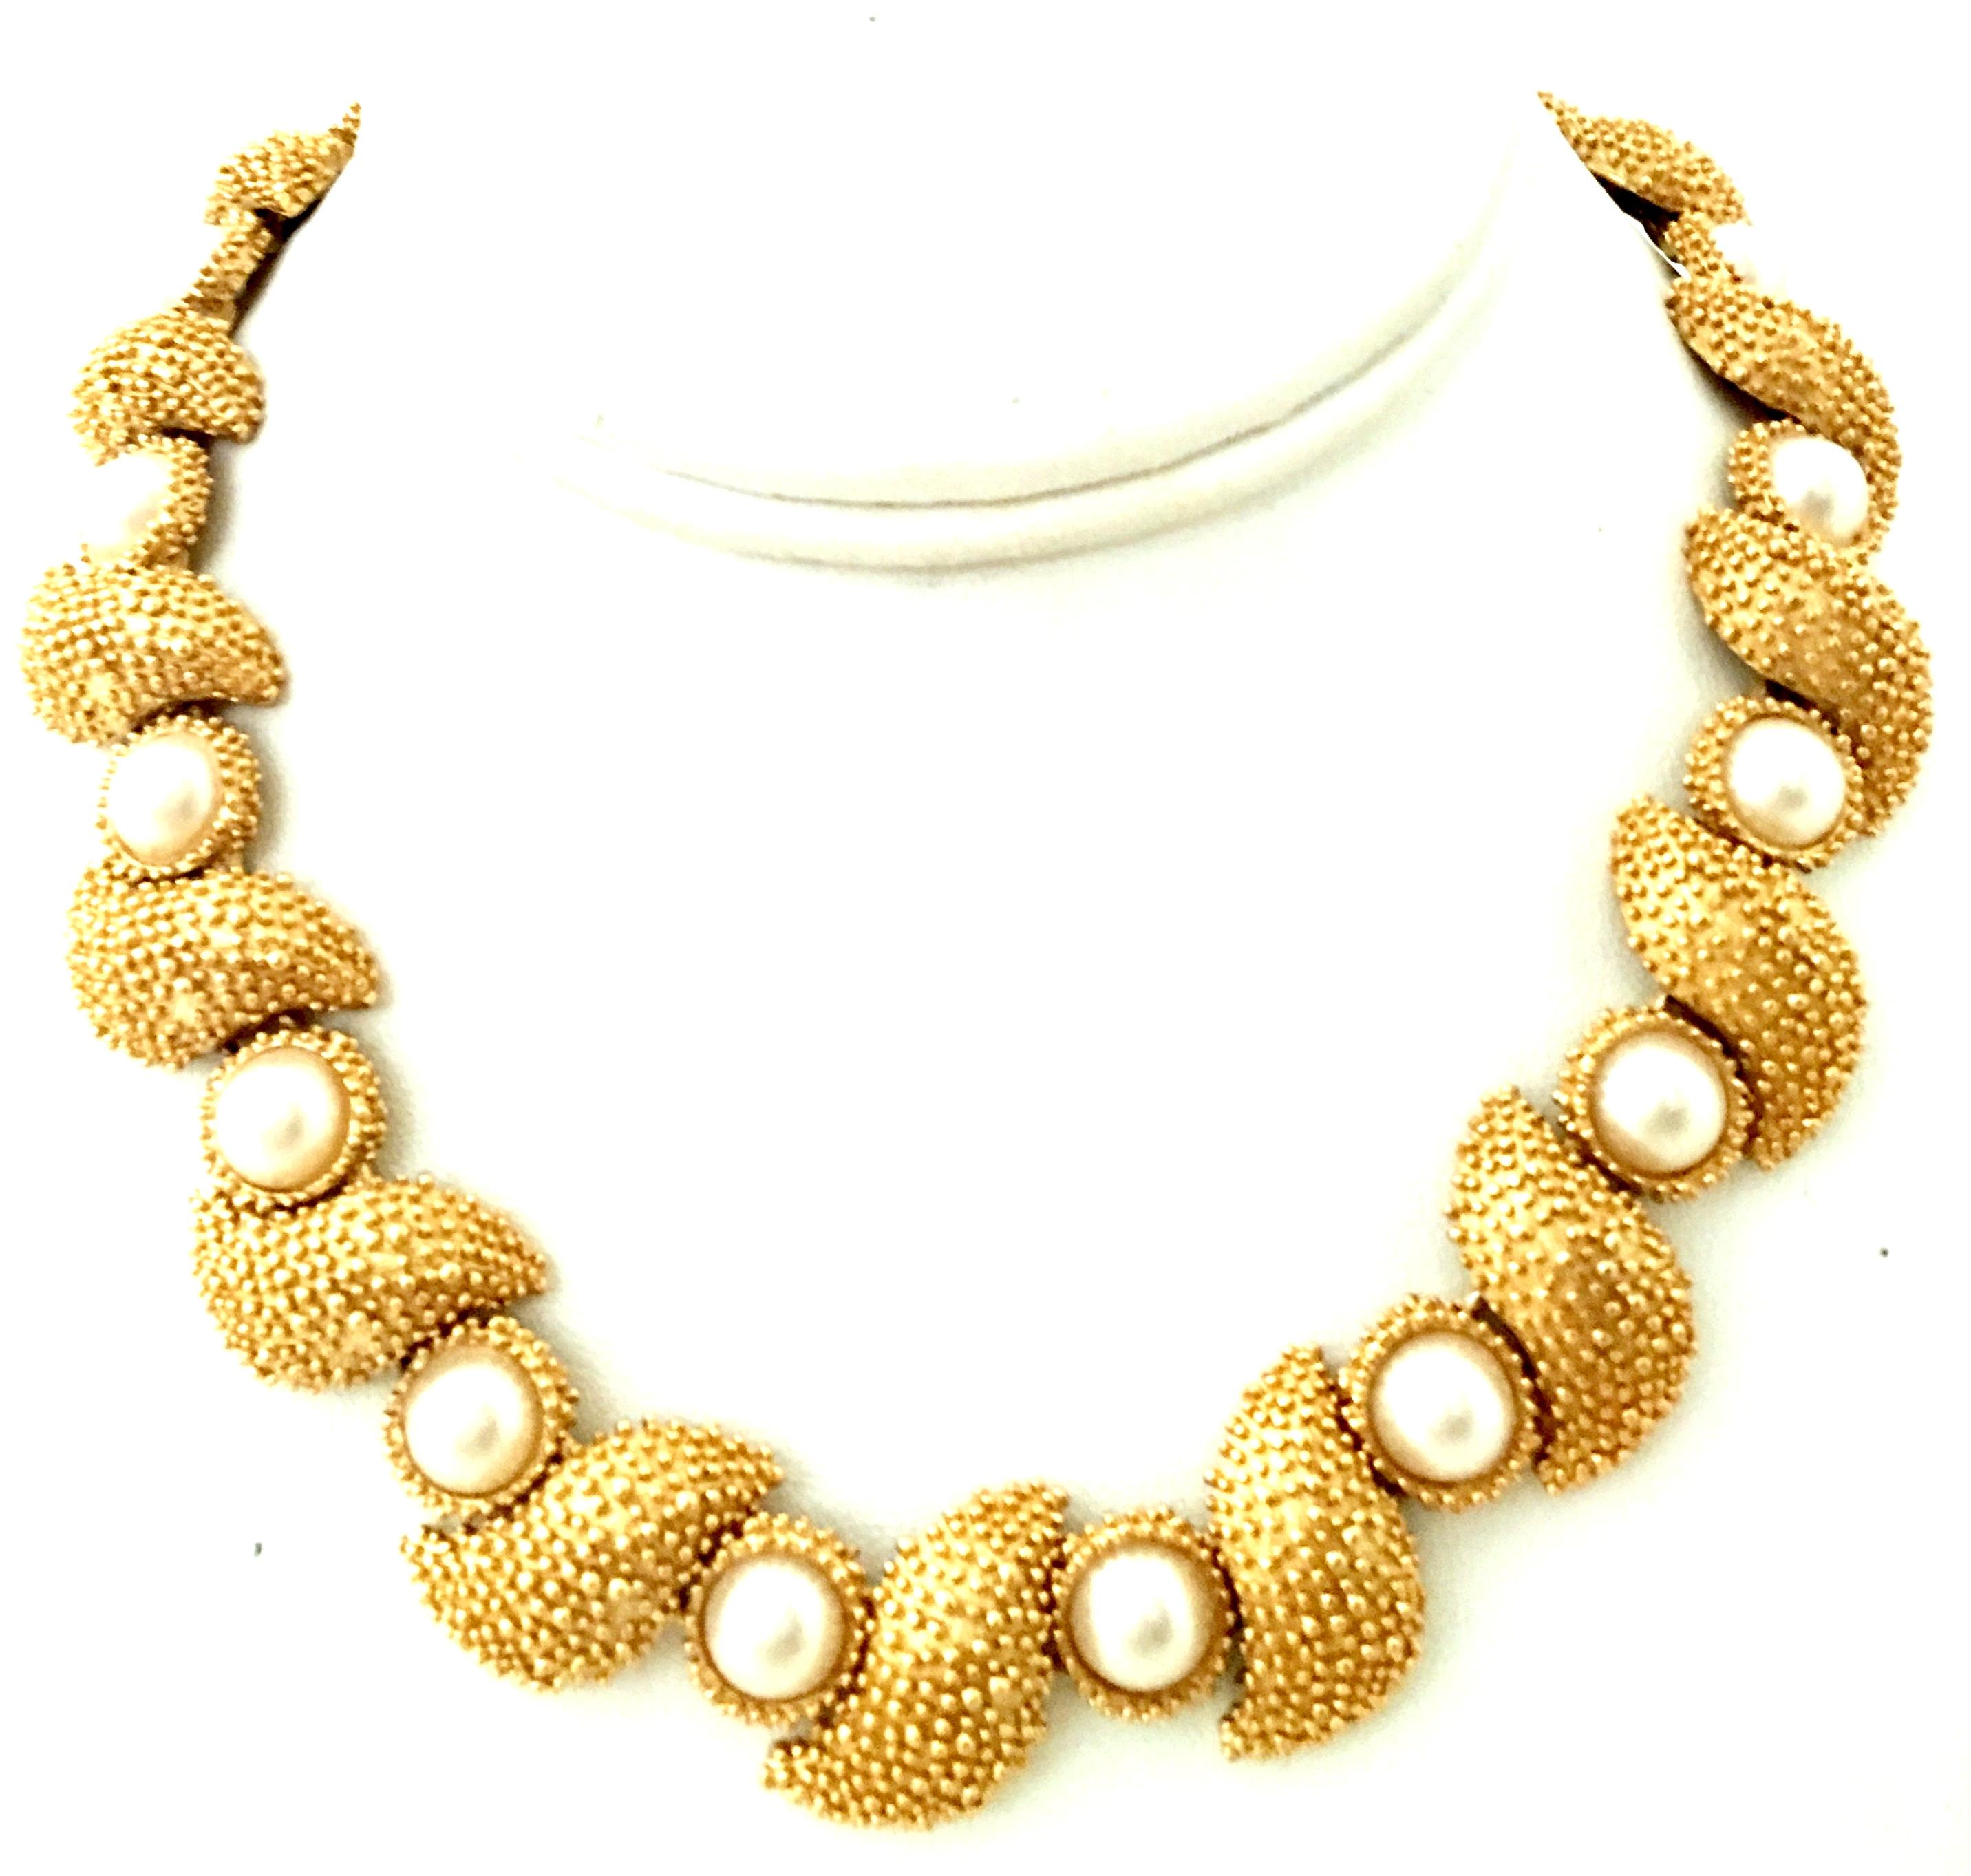 20th Century Gold Plate & Faux Pearl Necklace And Bracelet By, Trifari-Set Of Two Pieces. This coveted gold plate link necklace and bracelet features a gold plate high relief textured ground with cabochon set round white faux pearls.Each pearl is